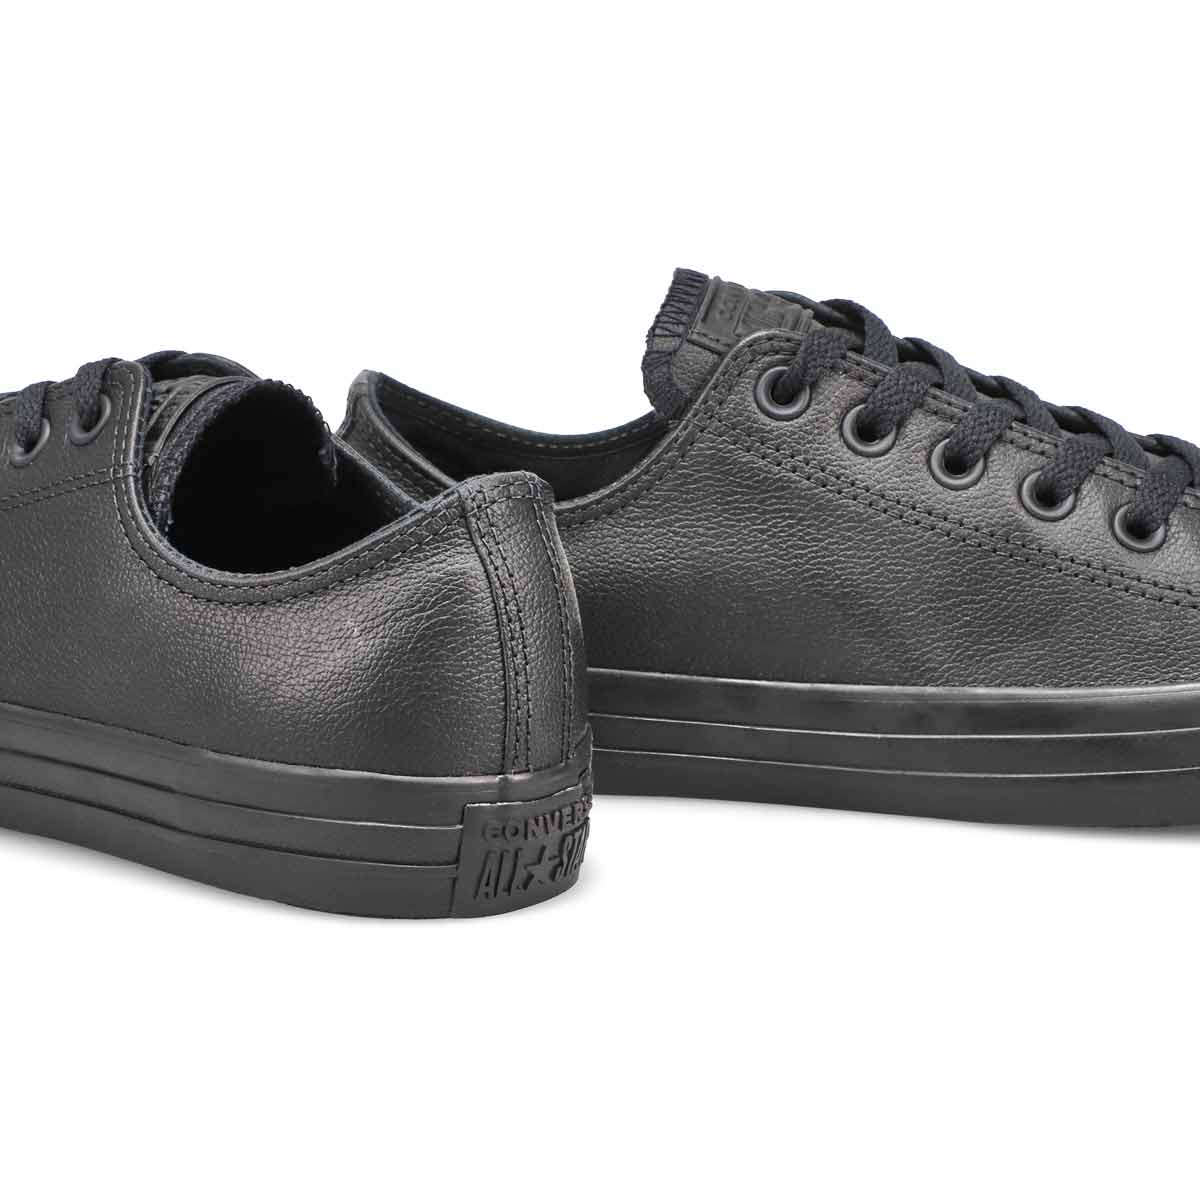 Men's Chuck Taylor All Star Leather Sneaker- Black